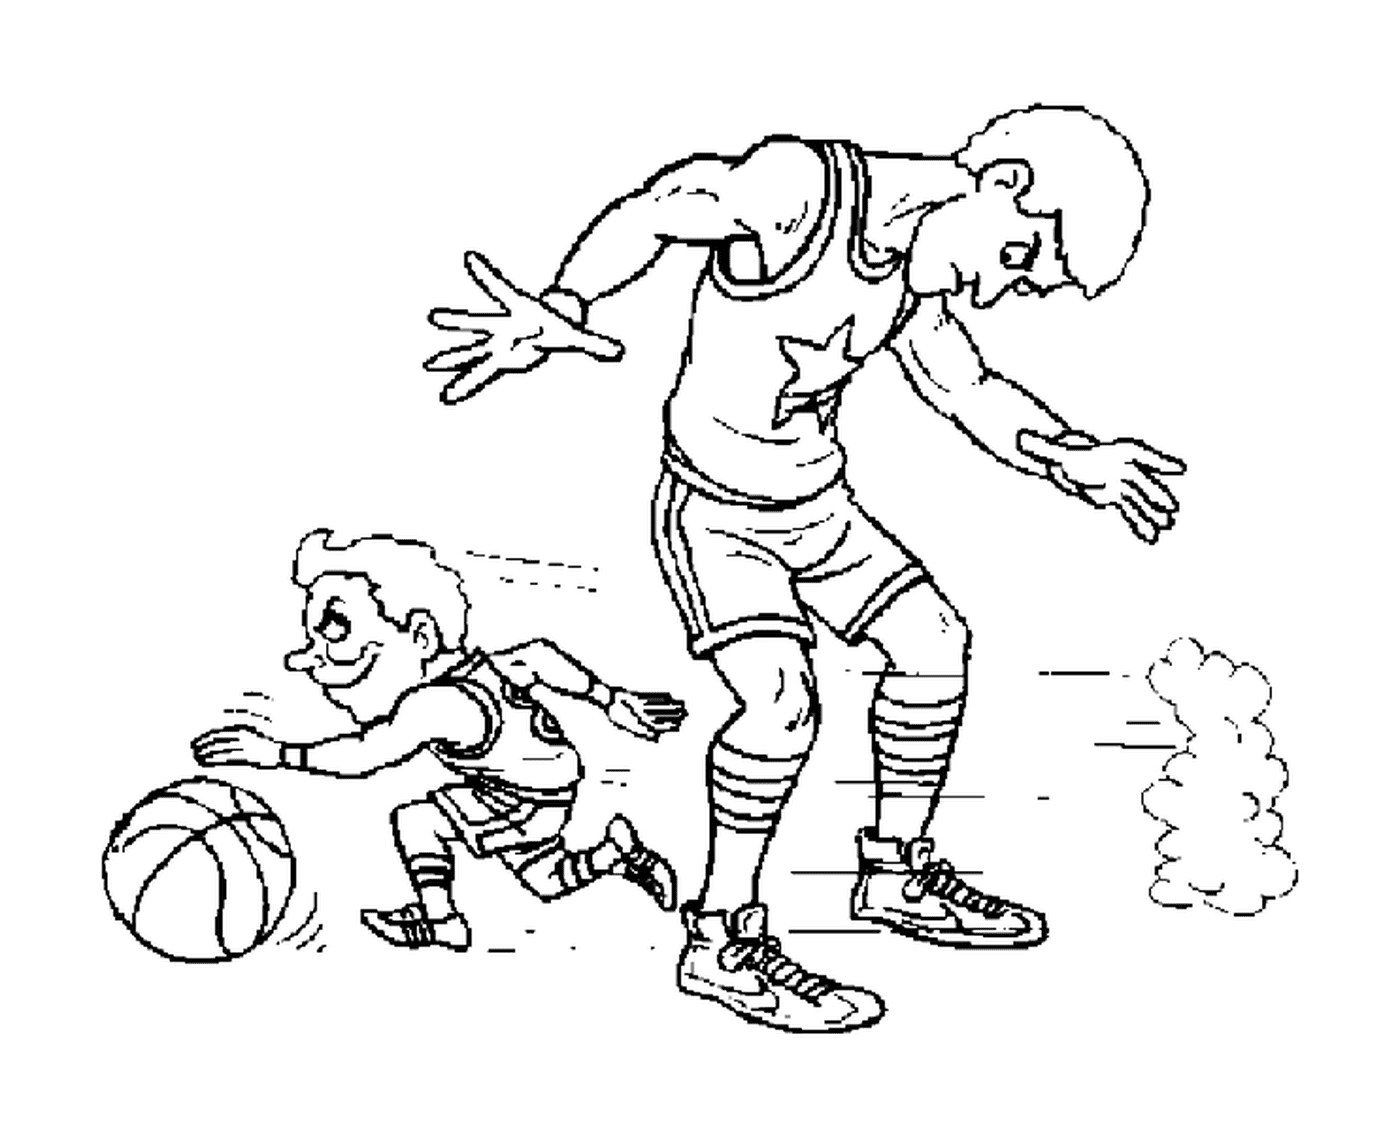  A small player passes under the legs of another player 